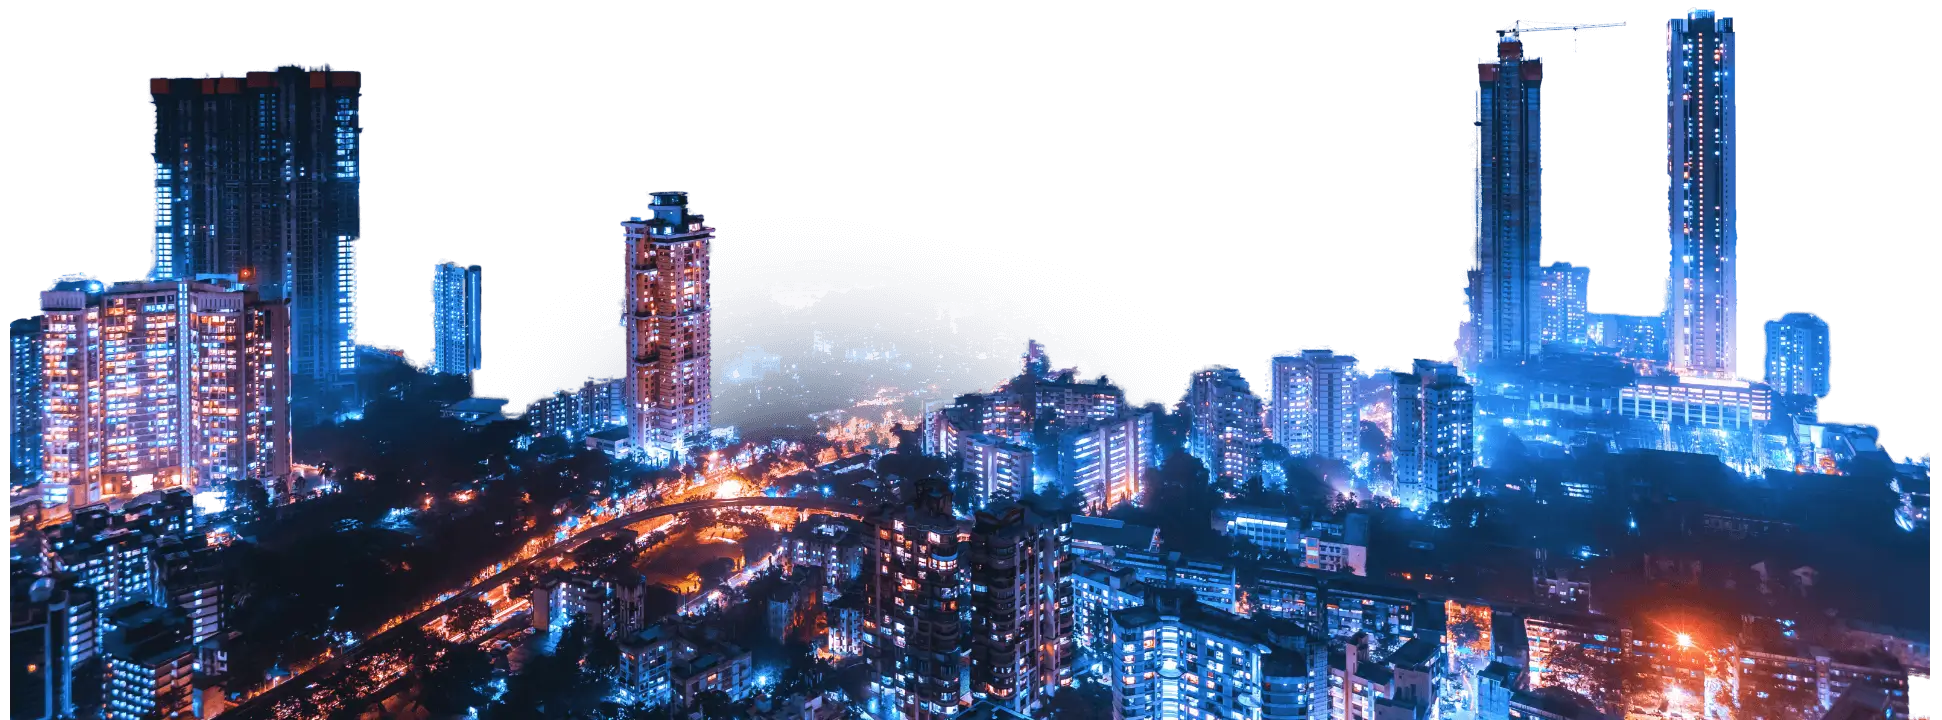 Panoramic view of a city skyline at night with high-rise buildings and streets illuminated in blue and orange lights, under a clear sky.